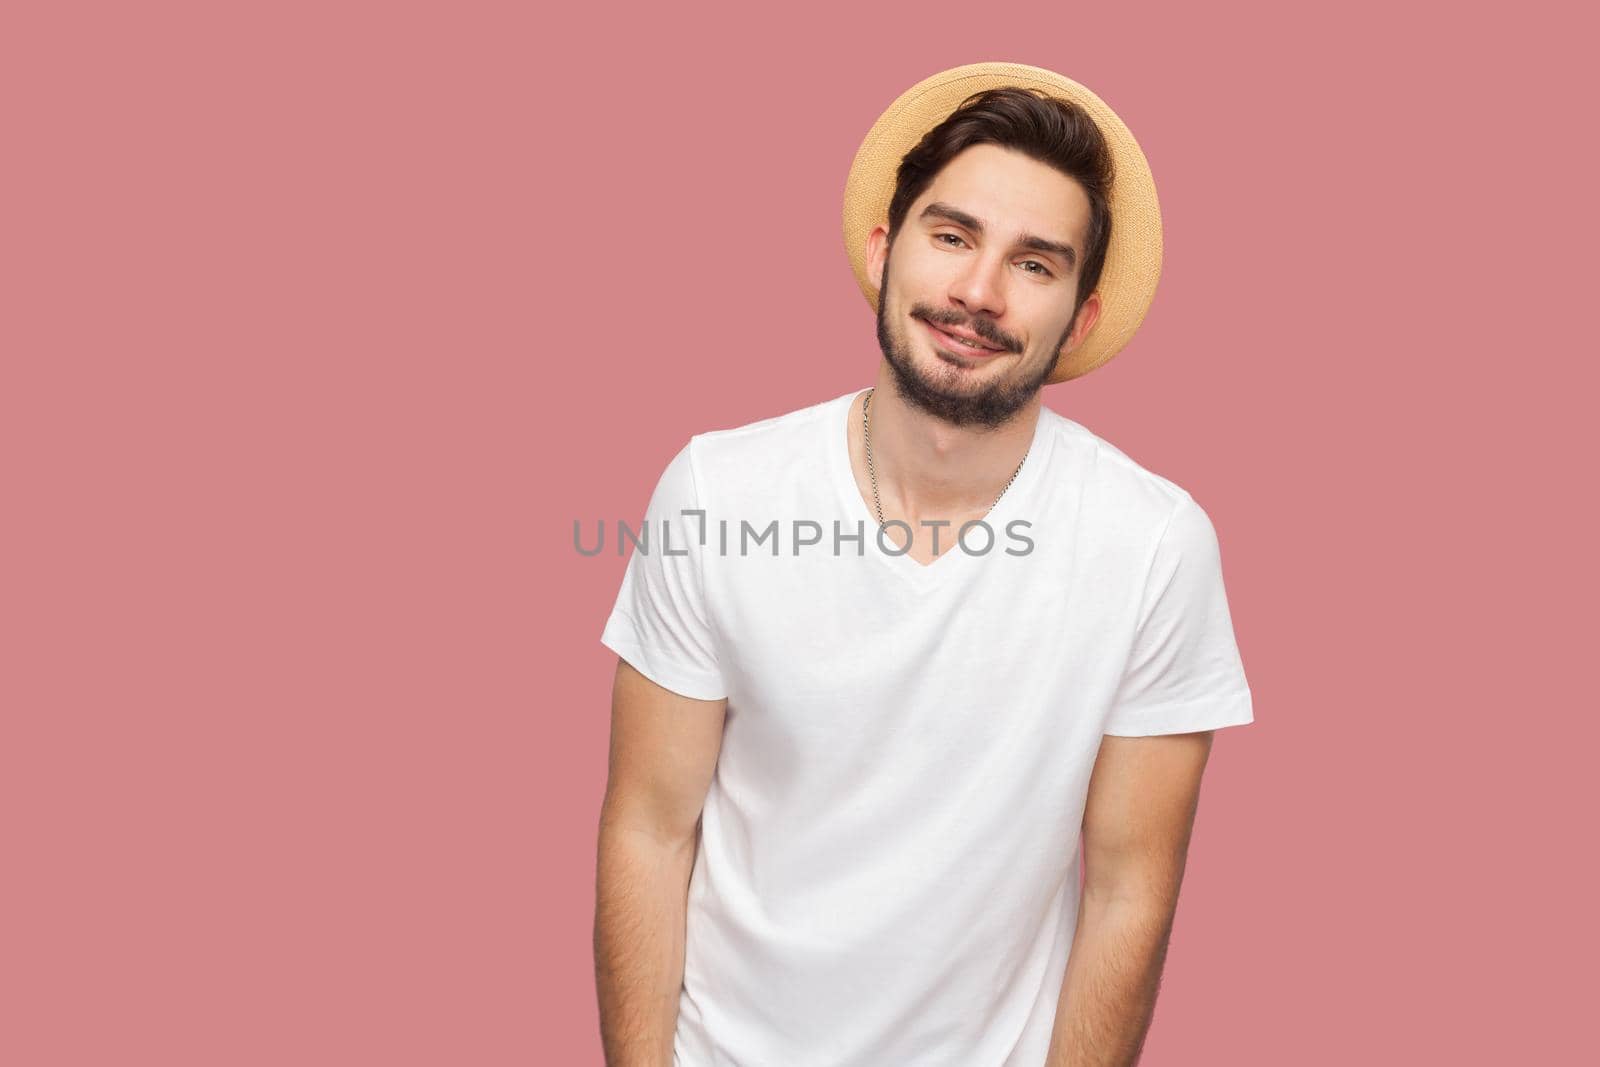 Portrait of happy bearded young man in white shirt with hat standing and looking at camera with smile. indoor studio shot, isolated on pink background copyspace.